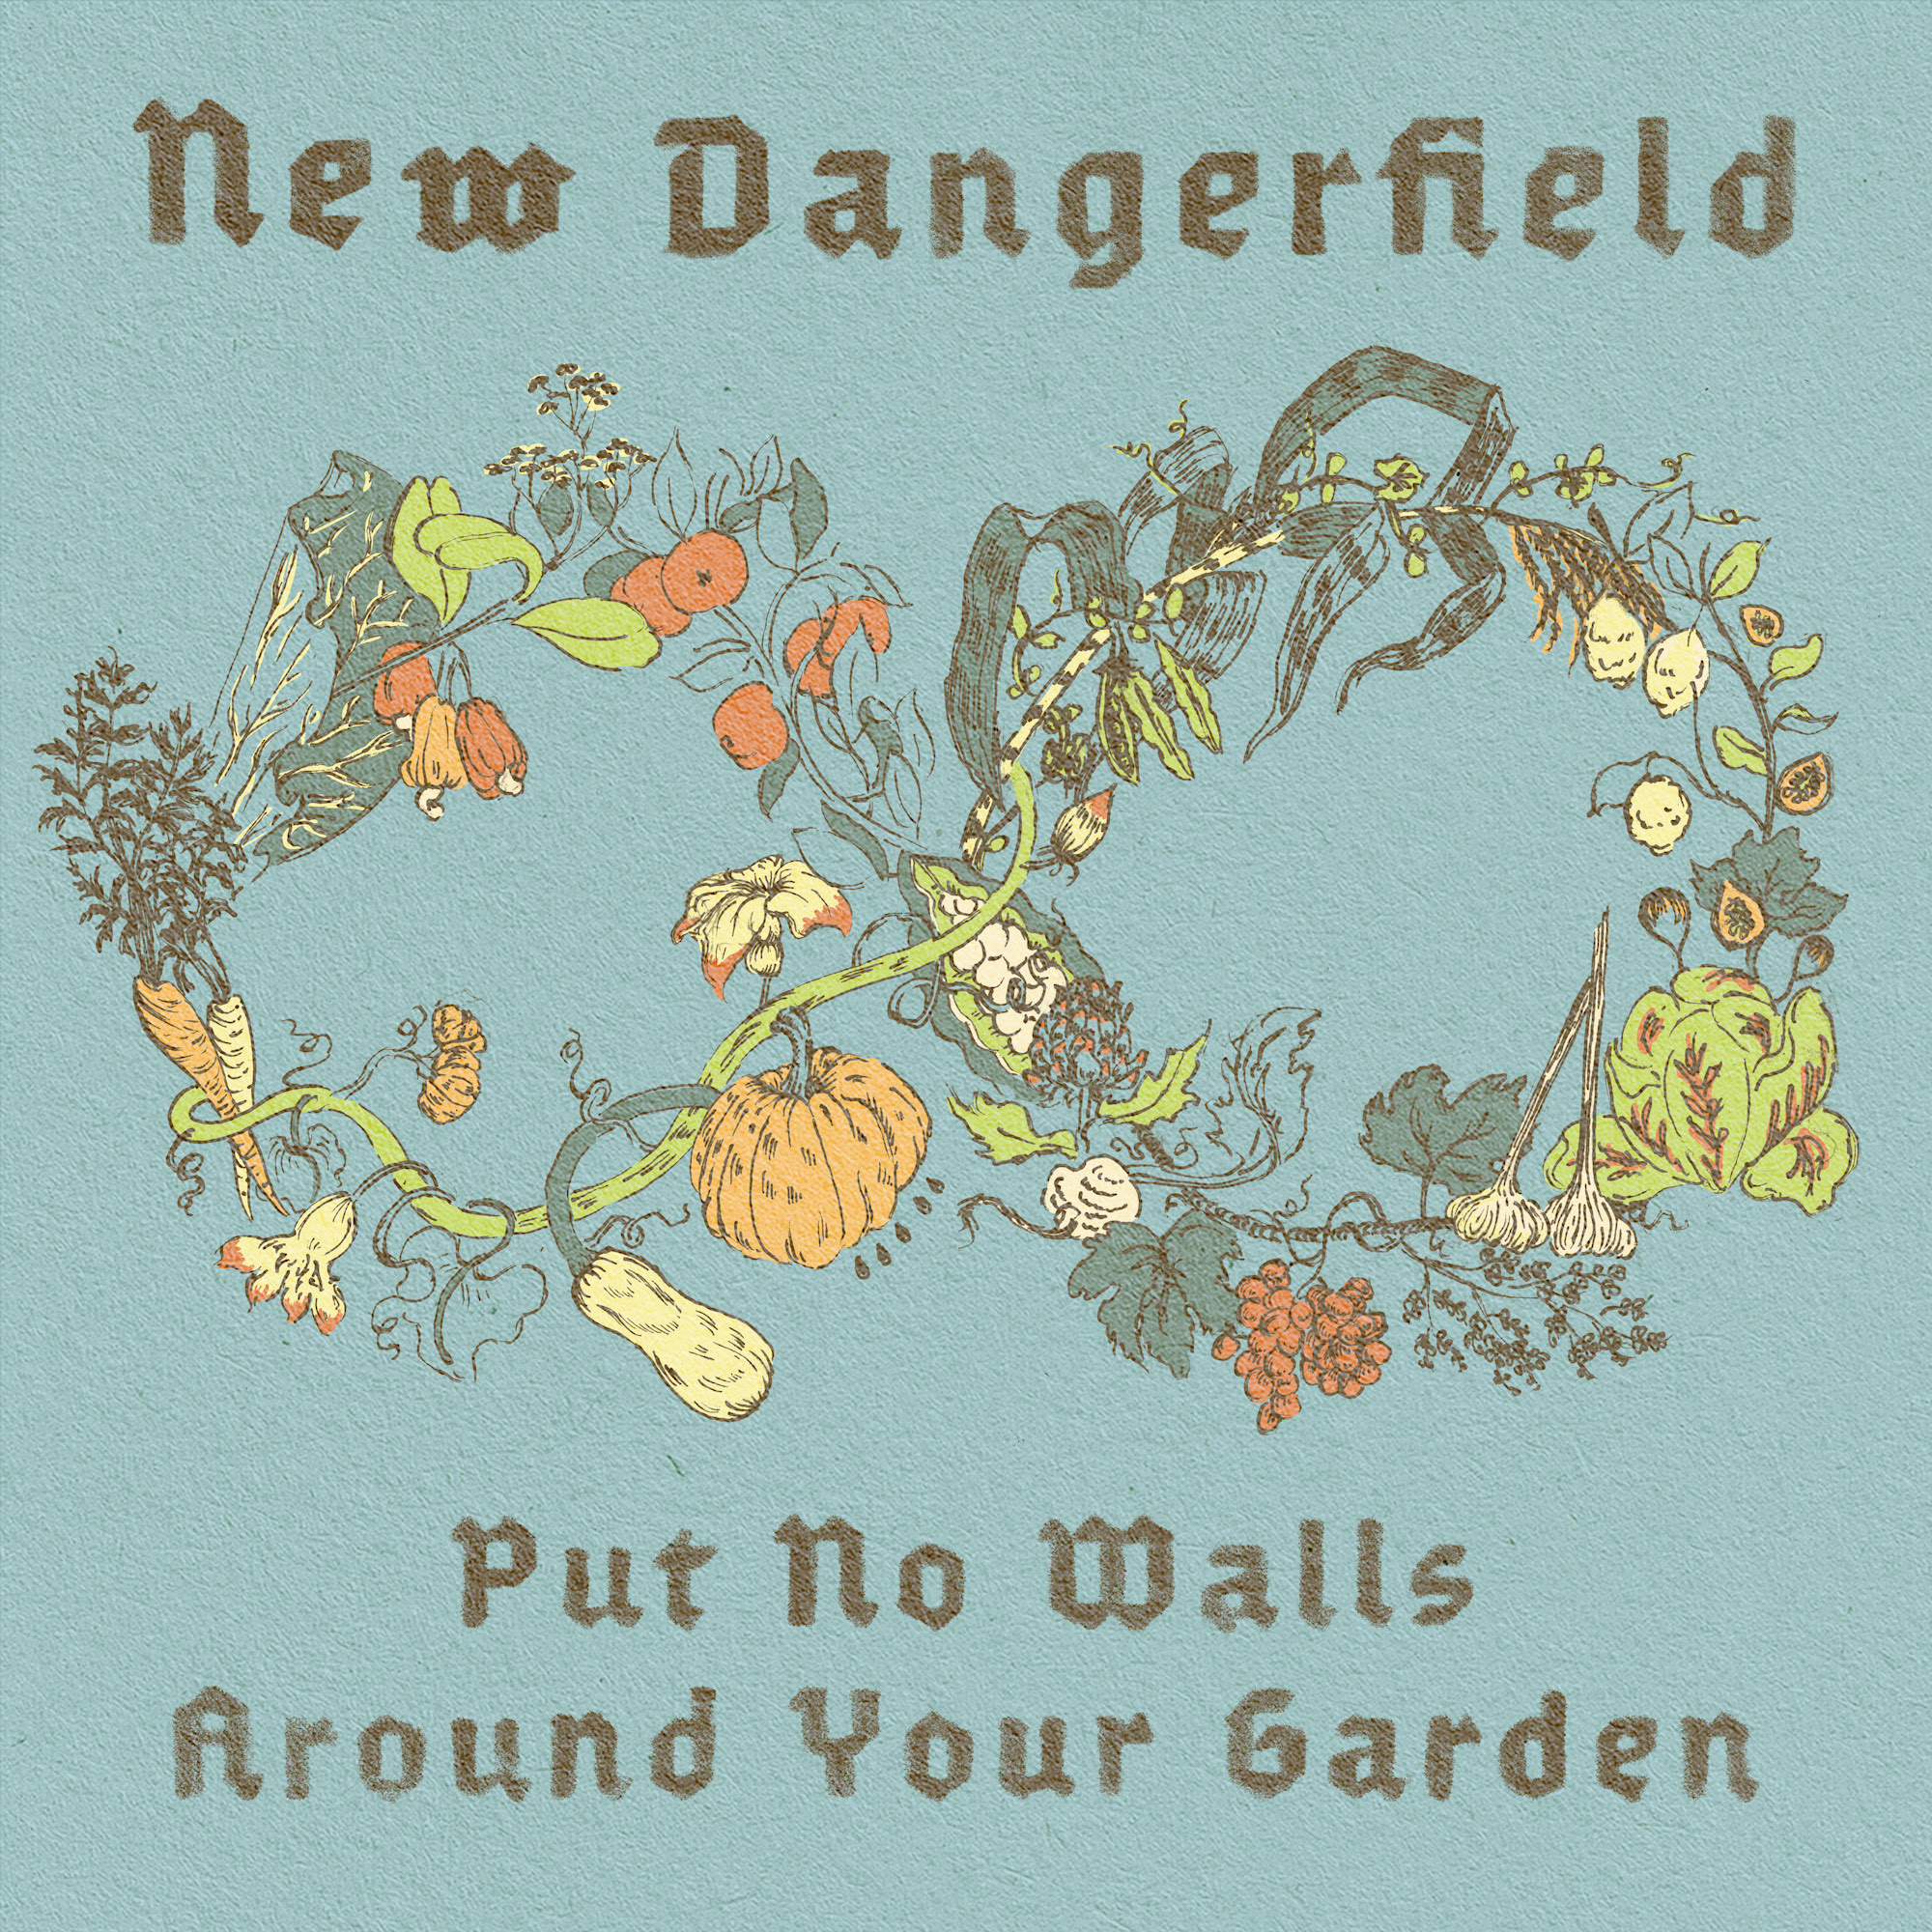 NEW DANGERFIELD RELEASES POIGNANT SECOND SINGLE "PUT NO WALLS AROUND YOUR GARDEN" WRITTEN BY KAIA KATER